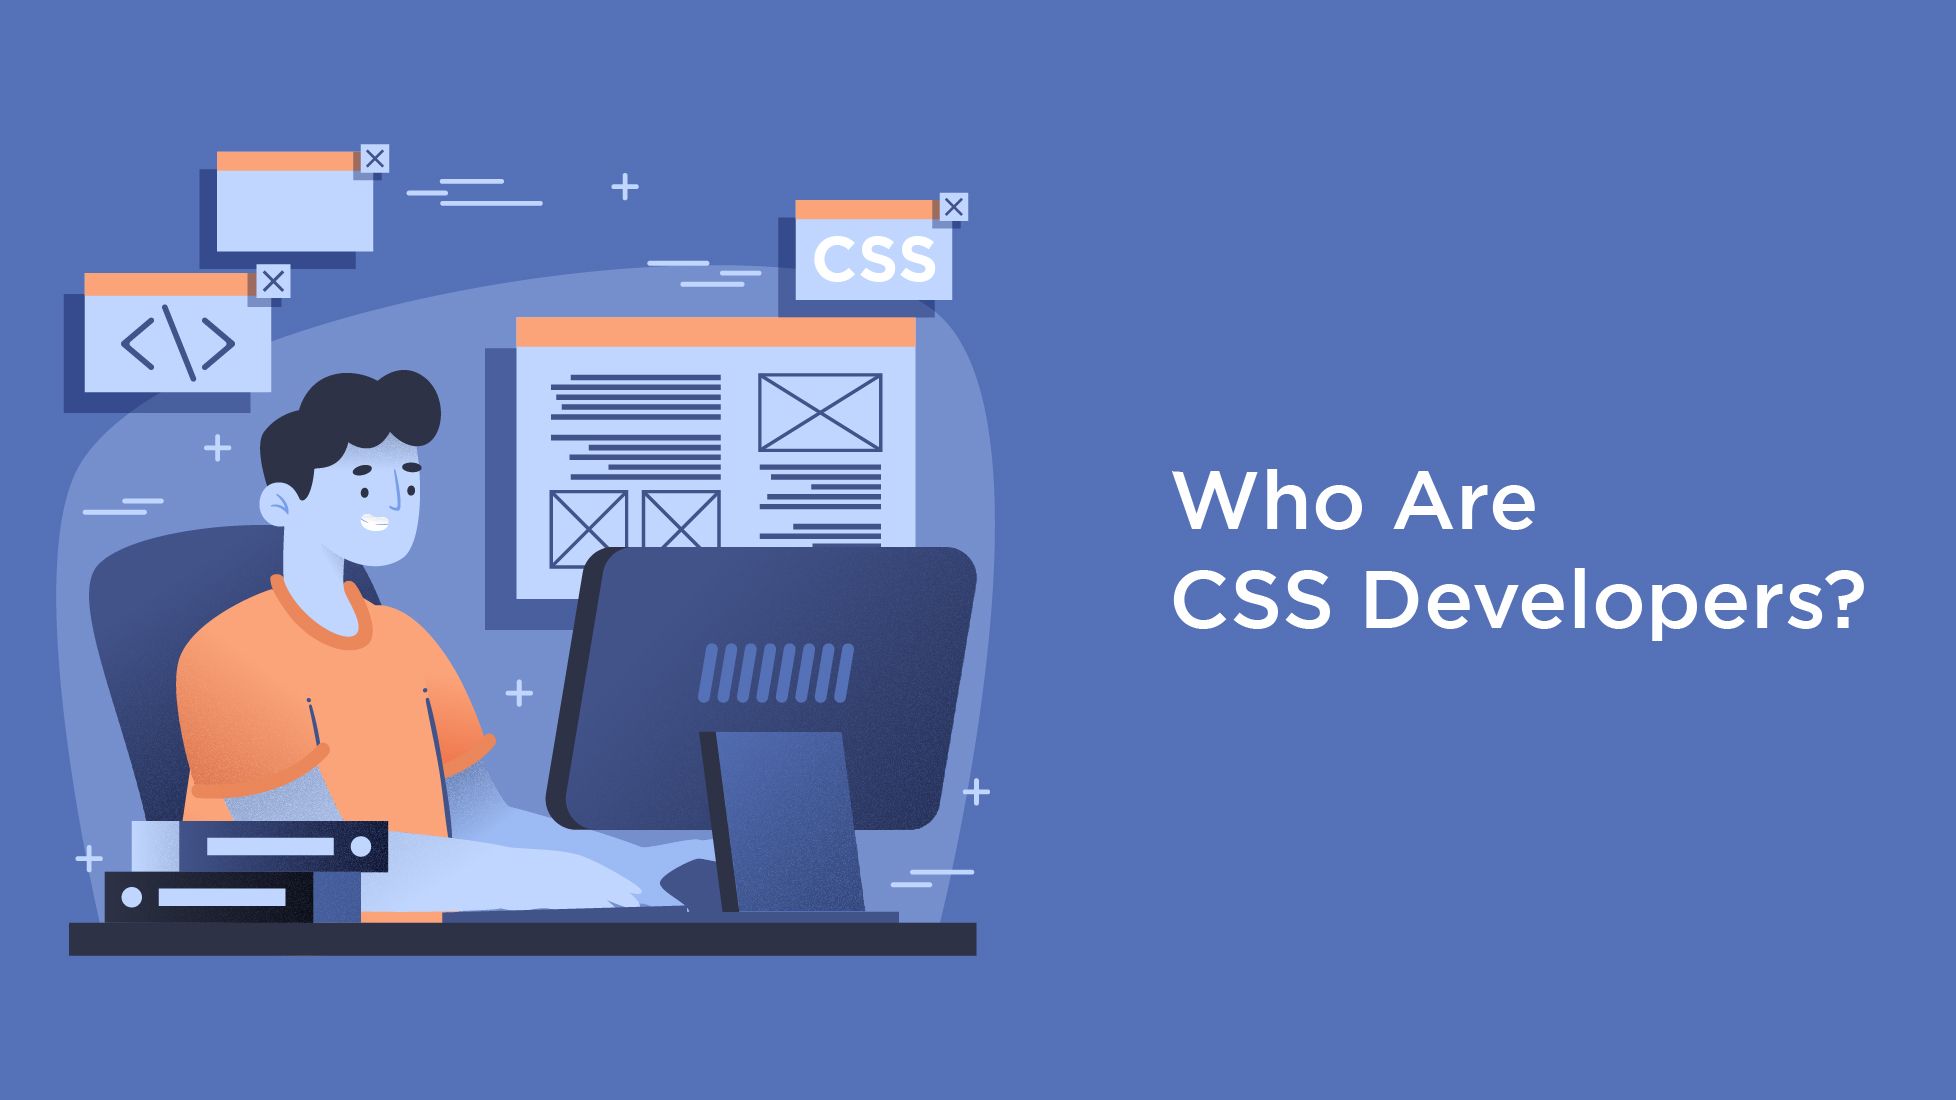 Who Are CSS Developers?